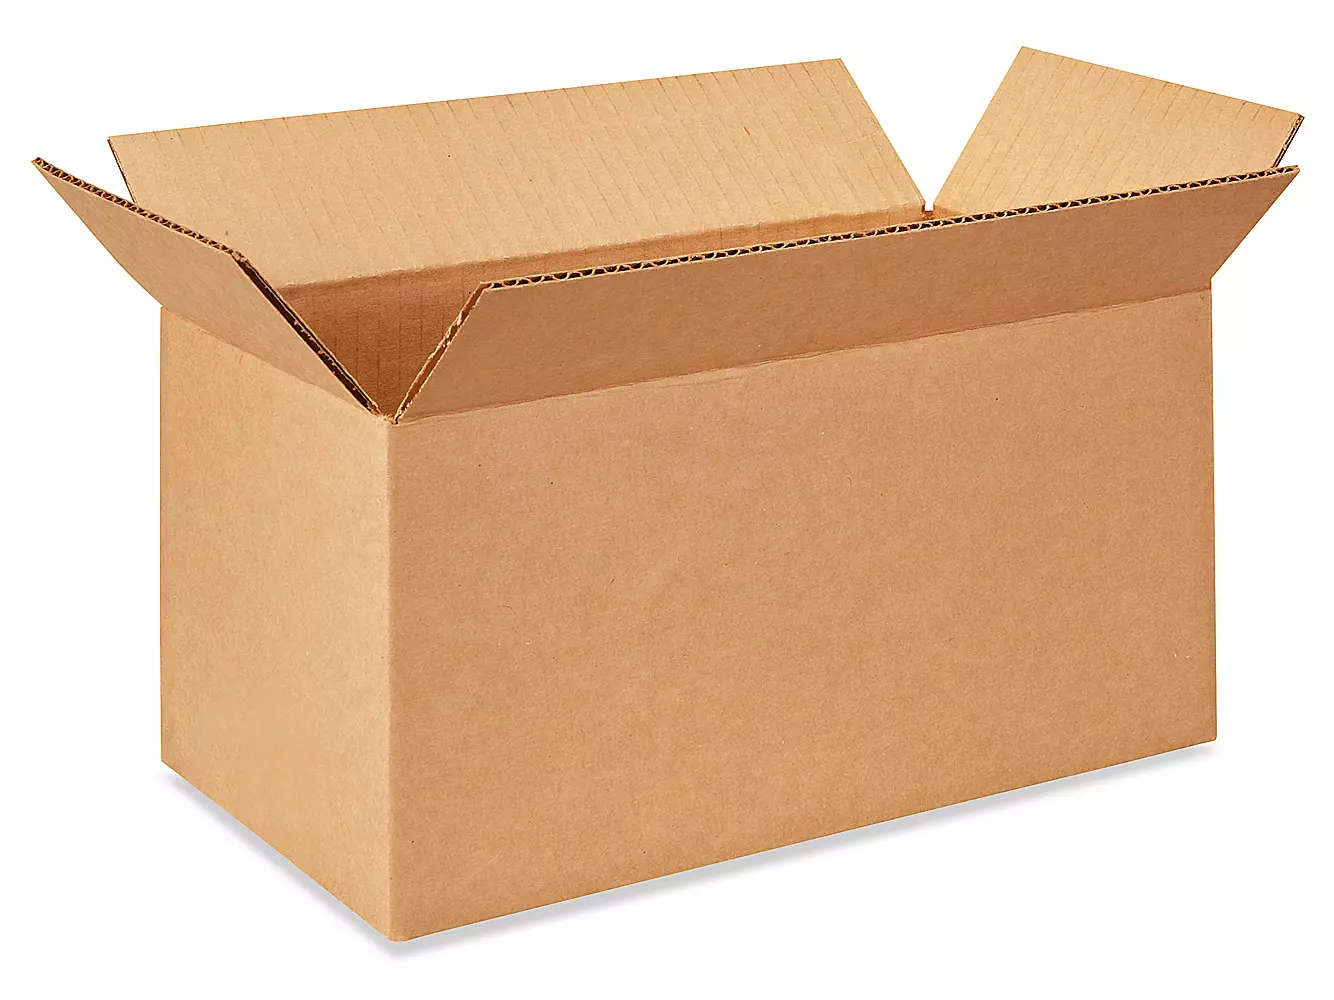 12 X 6 X 6" LIGHTWEIGHT 32 ECT CORRUGATED BOXES